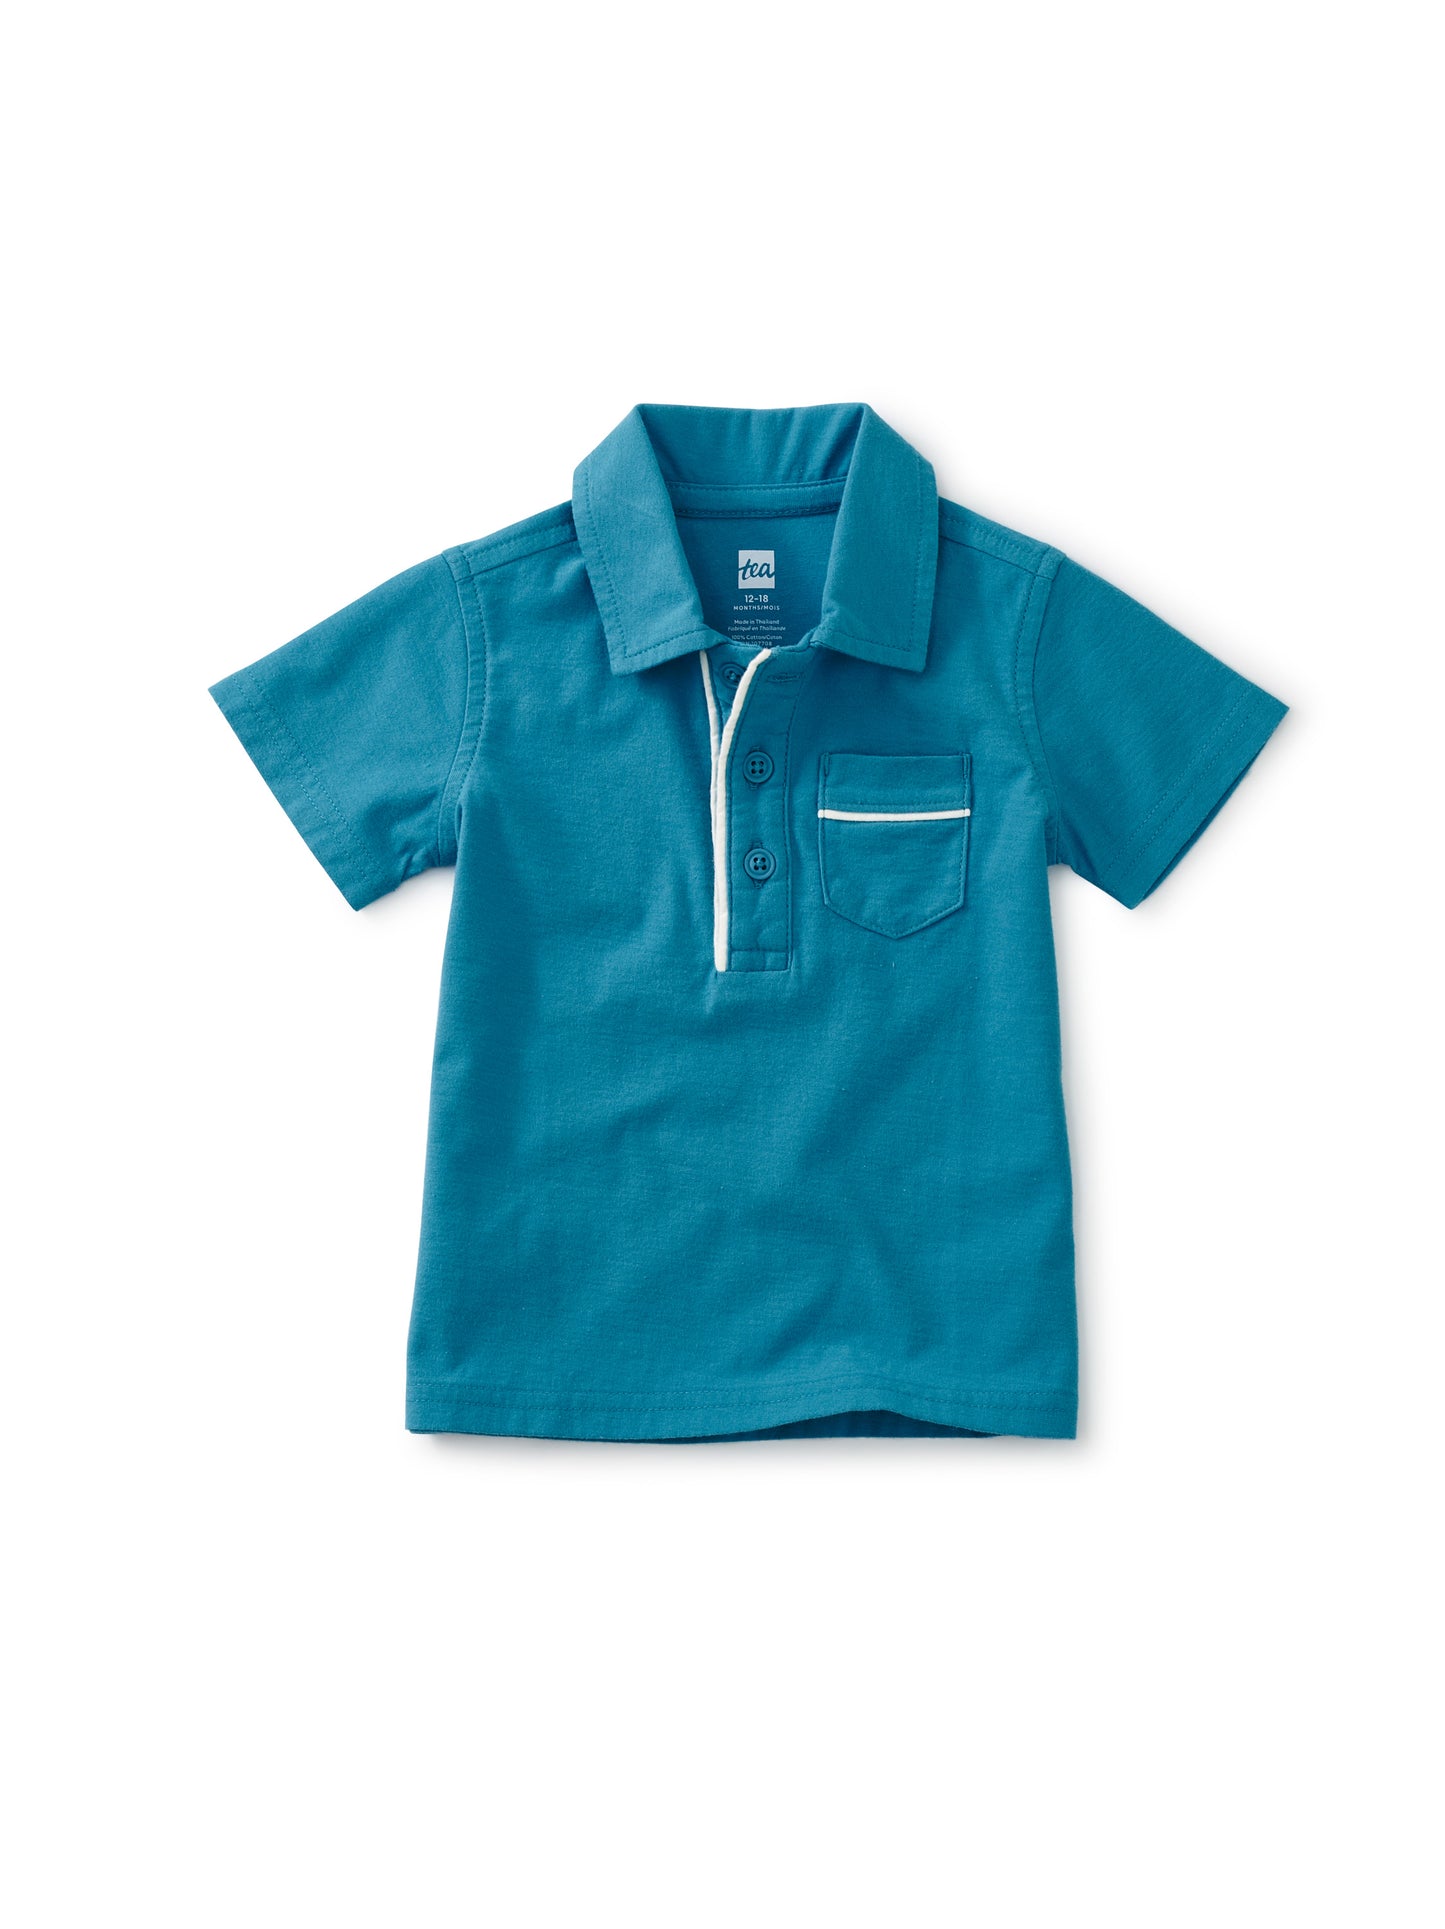 Piped Baby Polo: Nordic Blue